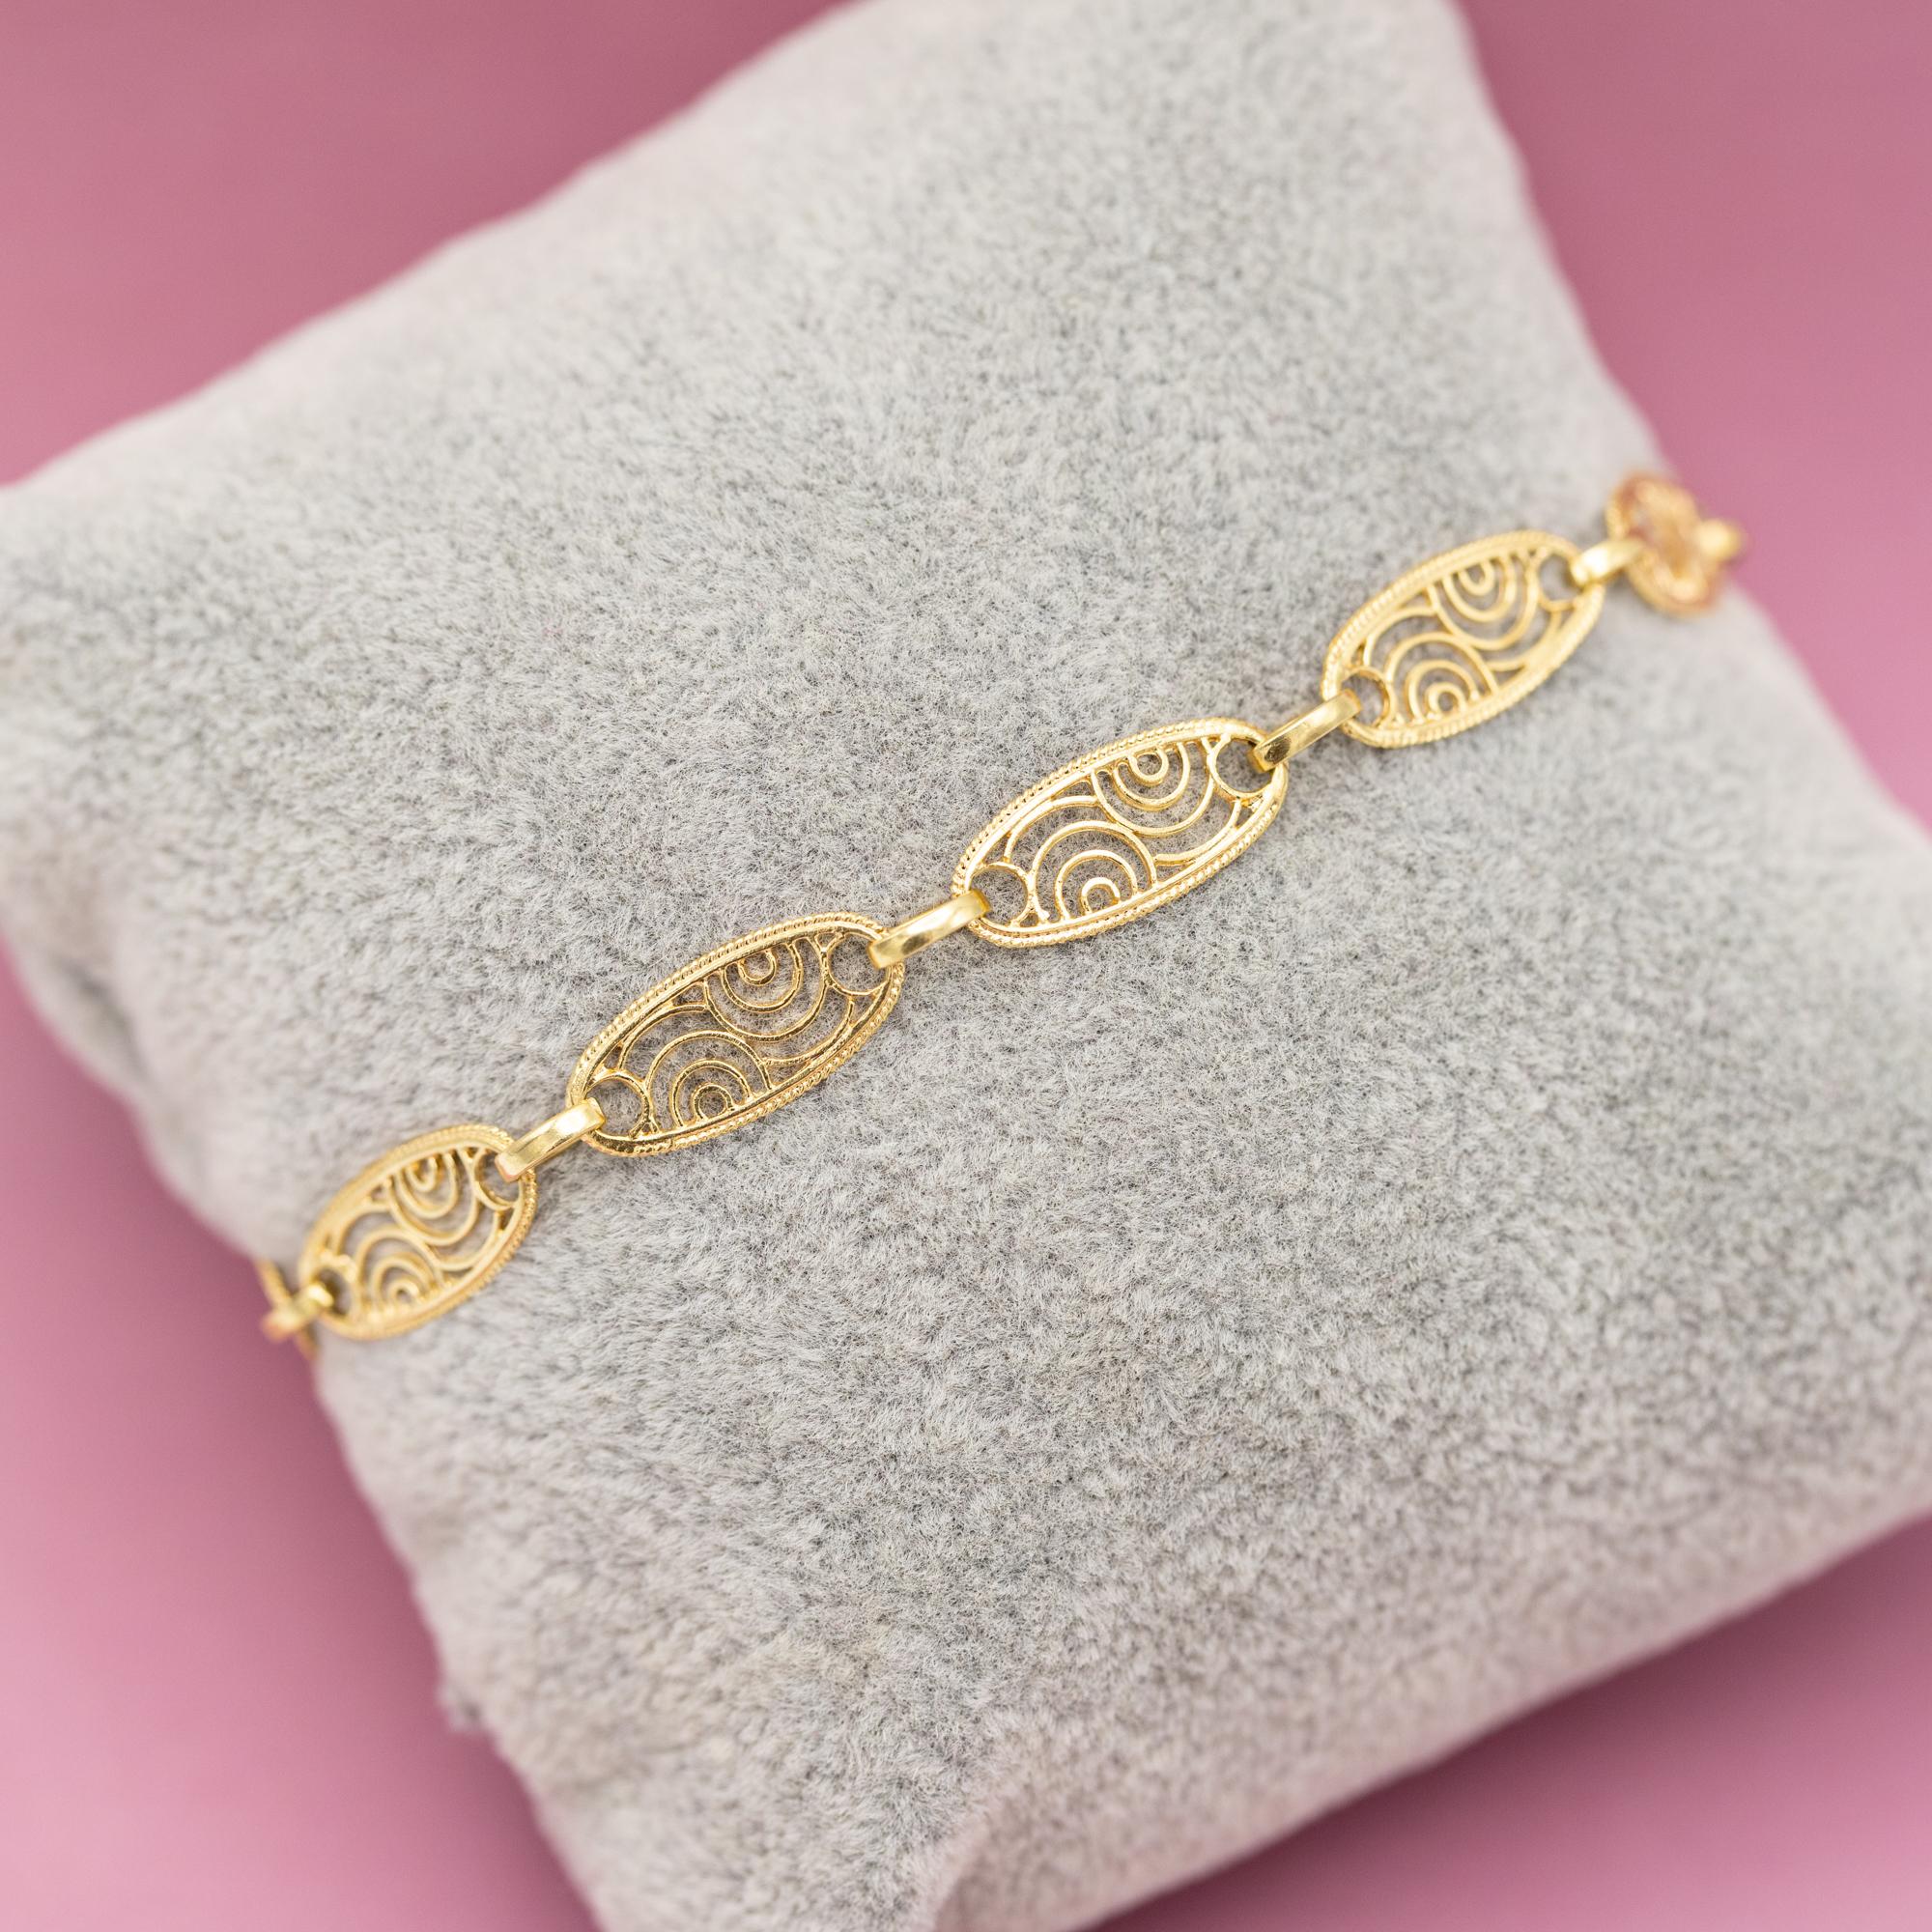 For sale is this Vintage filigree bracelet crafted in 18k yellow gold. This vintage beauty is hallmarked with a 750 mark and an Italian makers mark. Each link is wonderfully decorated with circle shaped  filigree details. We would like to let you